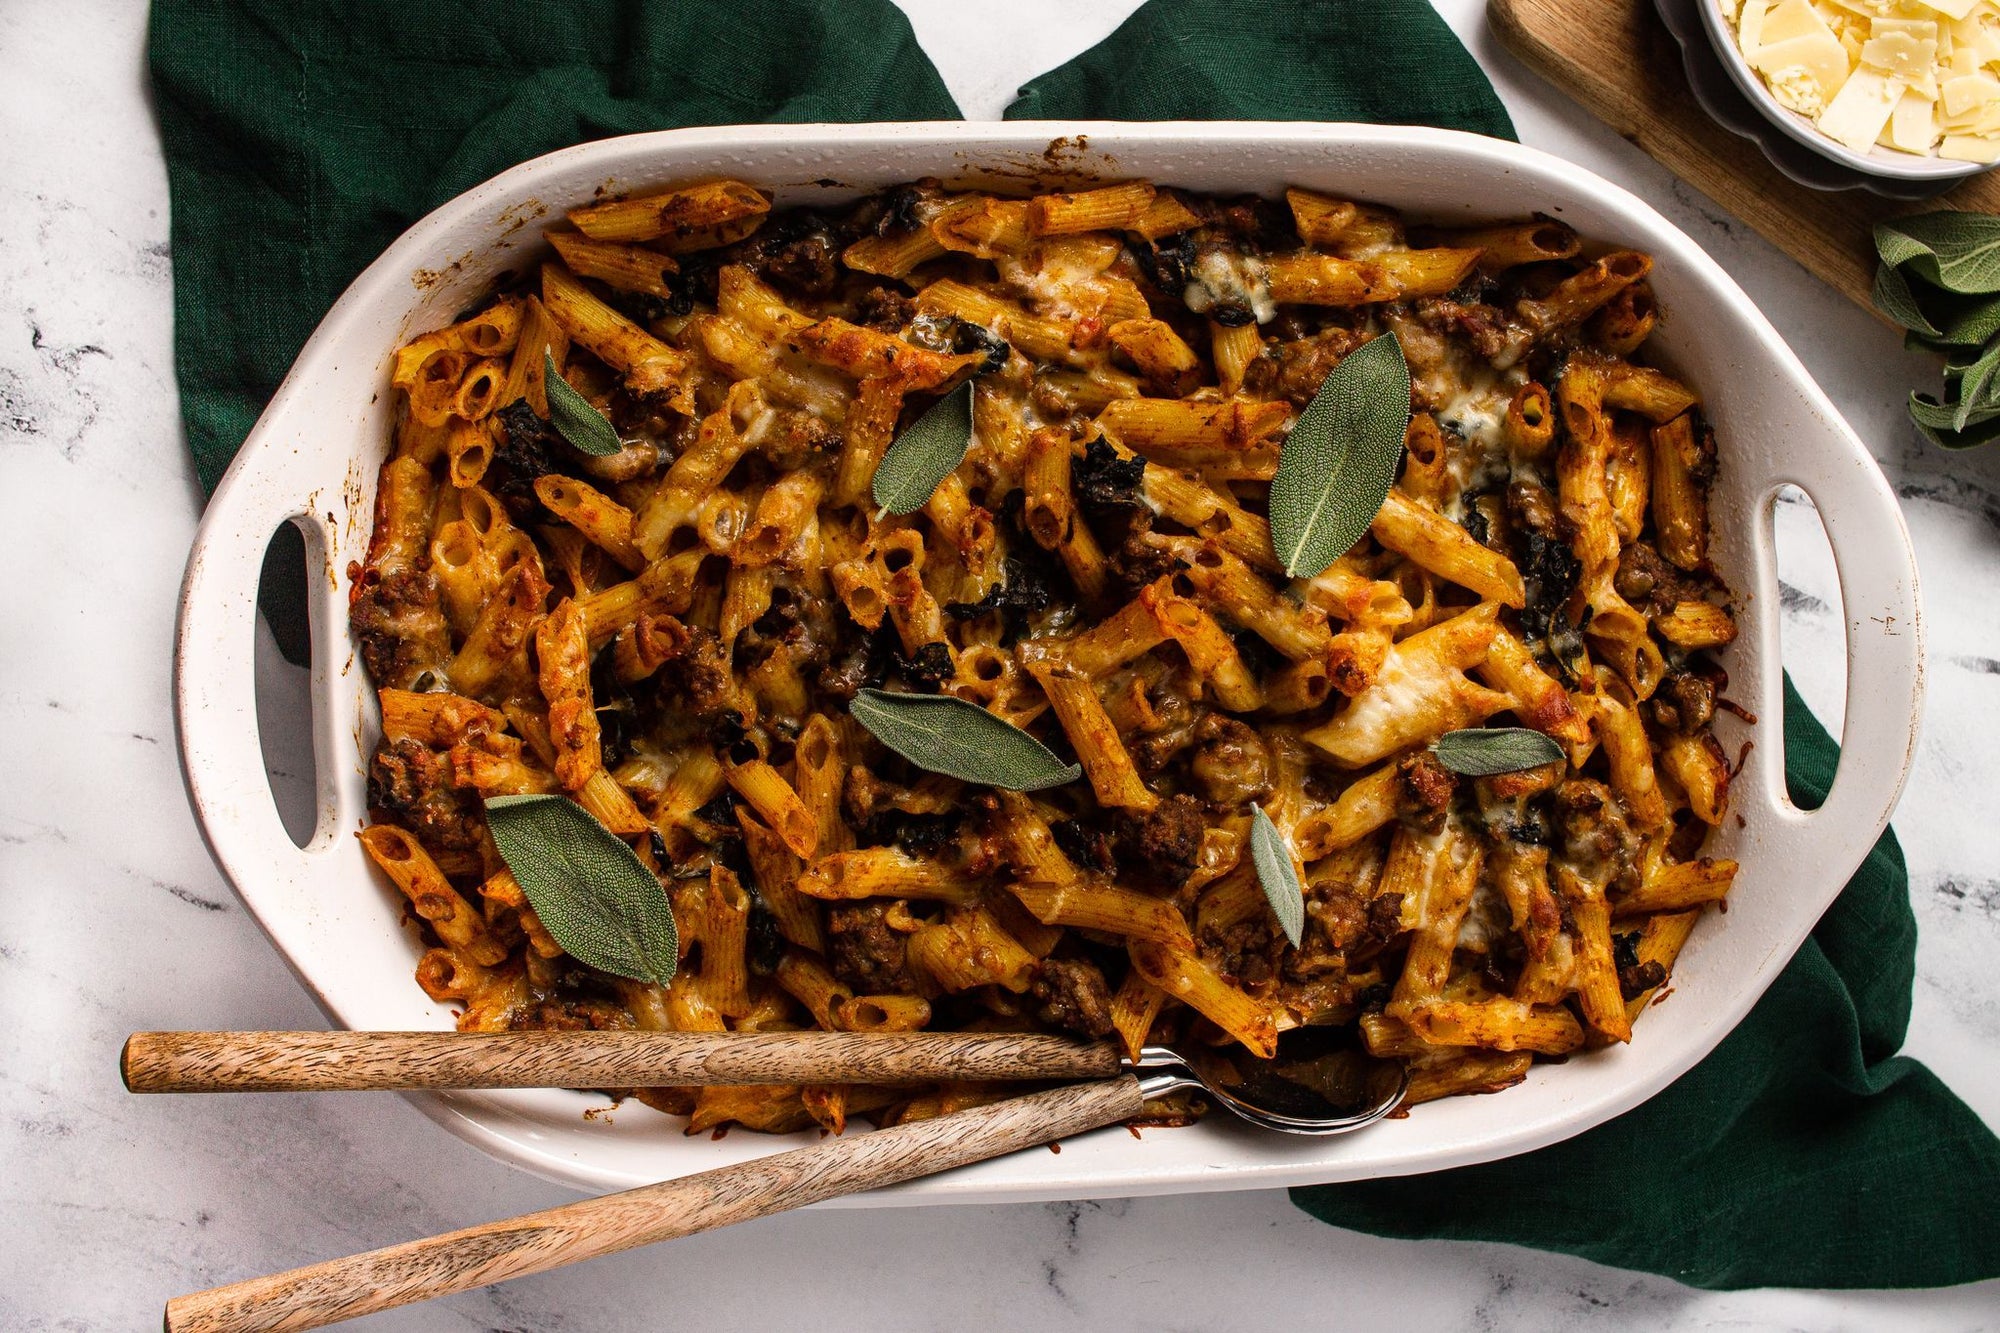 A casserole of Fody's Sausage, Kale and Pumpkin Baked Ziti. Gluten-free pasta coated with pumpkin and sausage is topped with whole sage leaves. The casserole is white, and two wooden spoons protrude from this low-fodmap pasta dish.